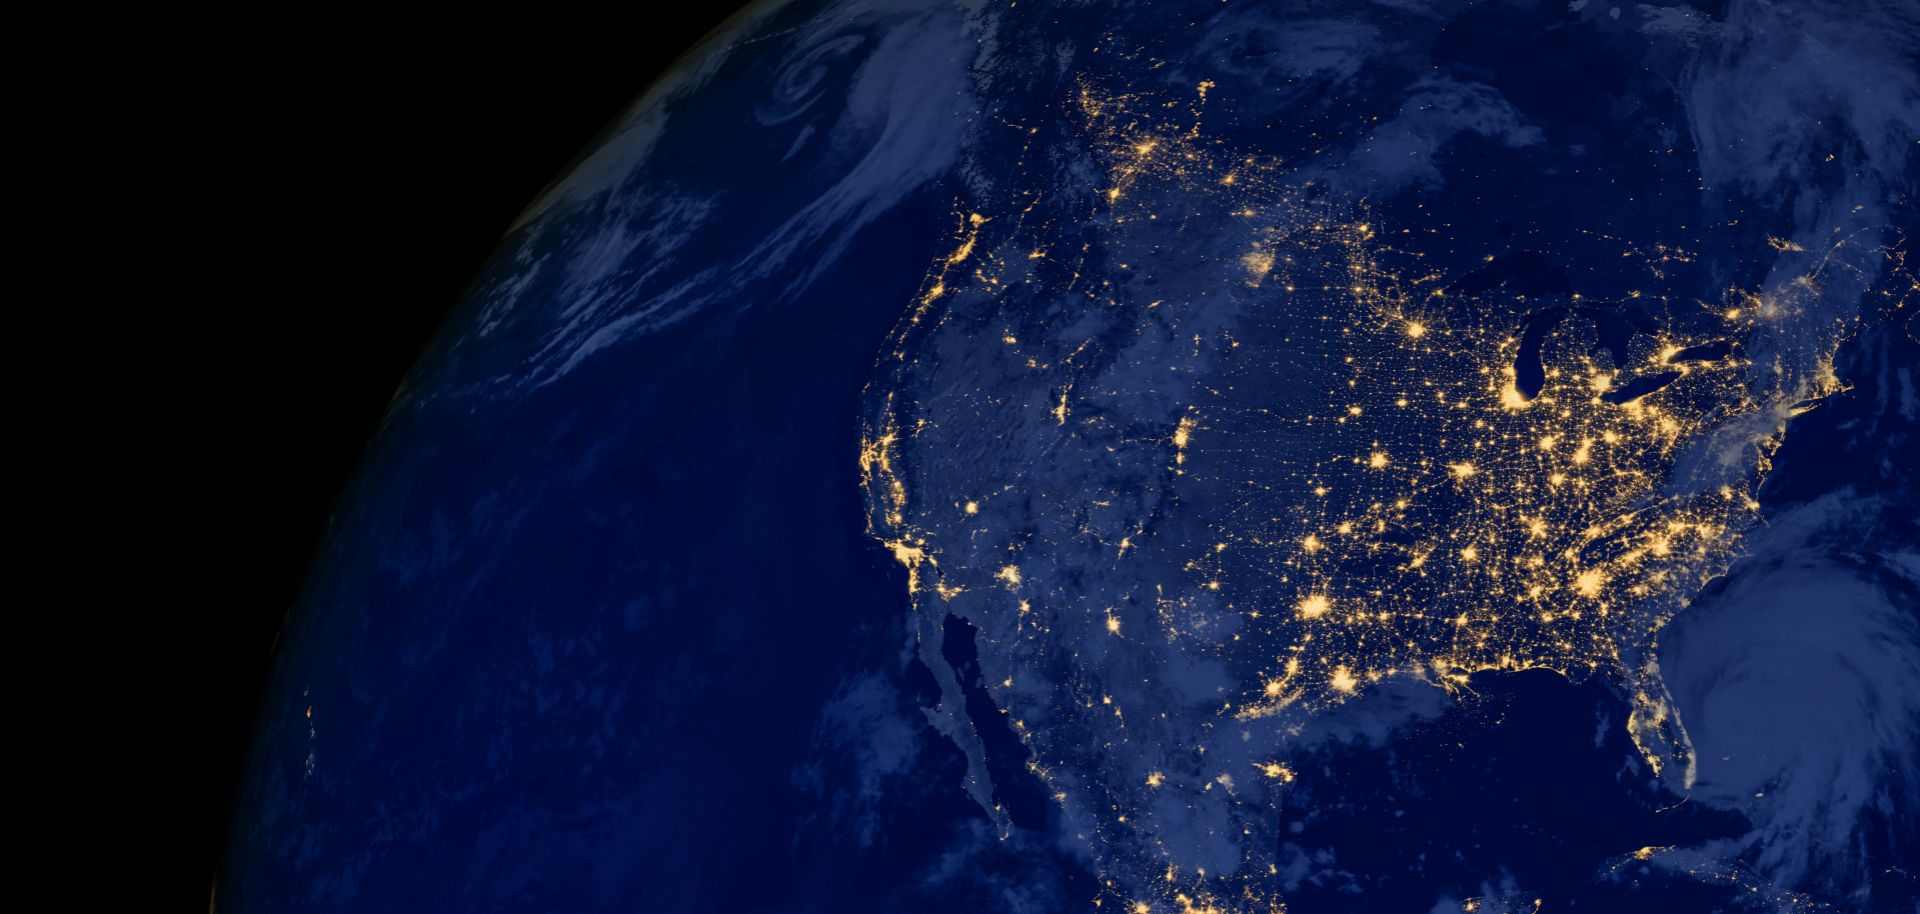 The nighttime lights of the United States are seen from space.